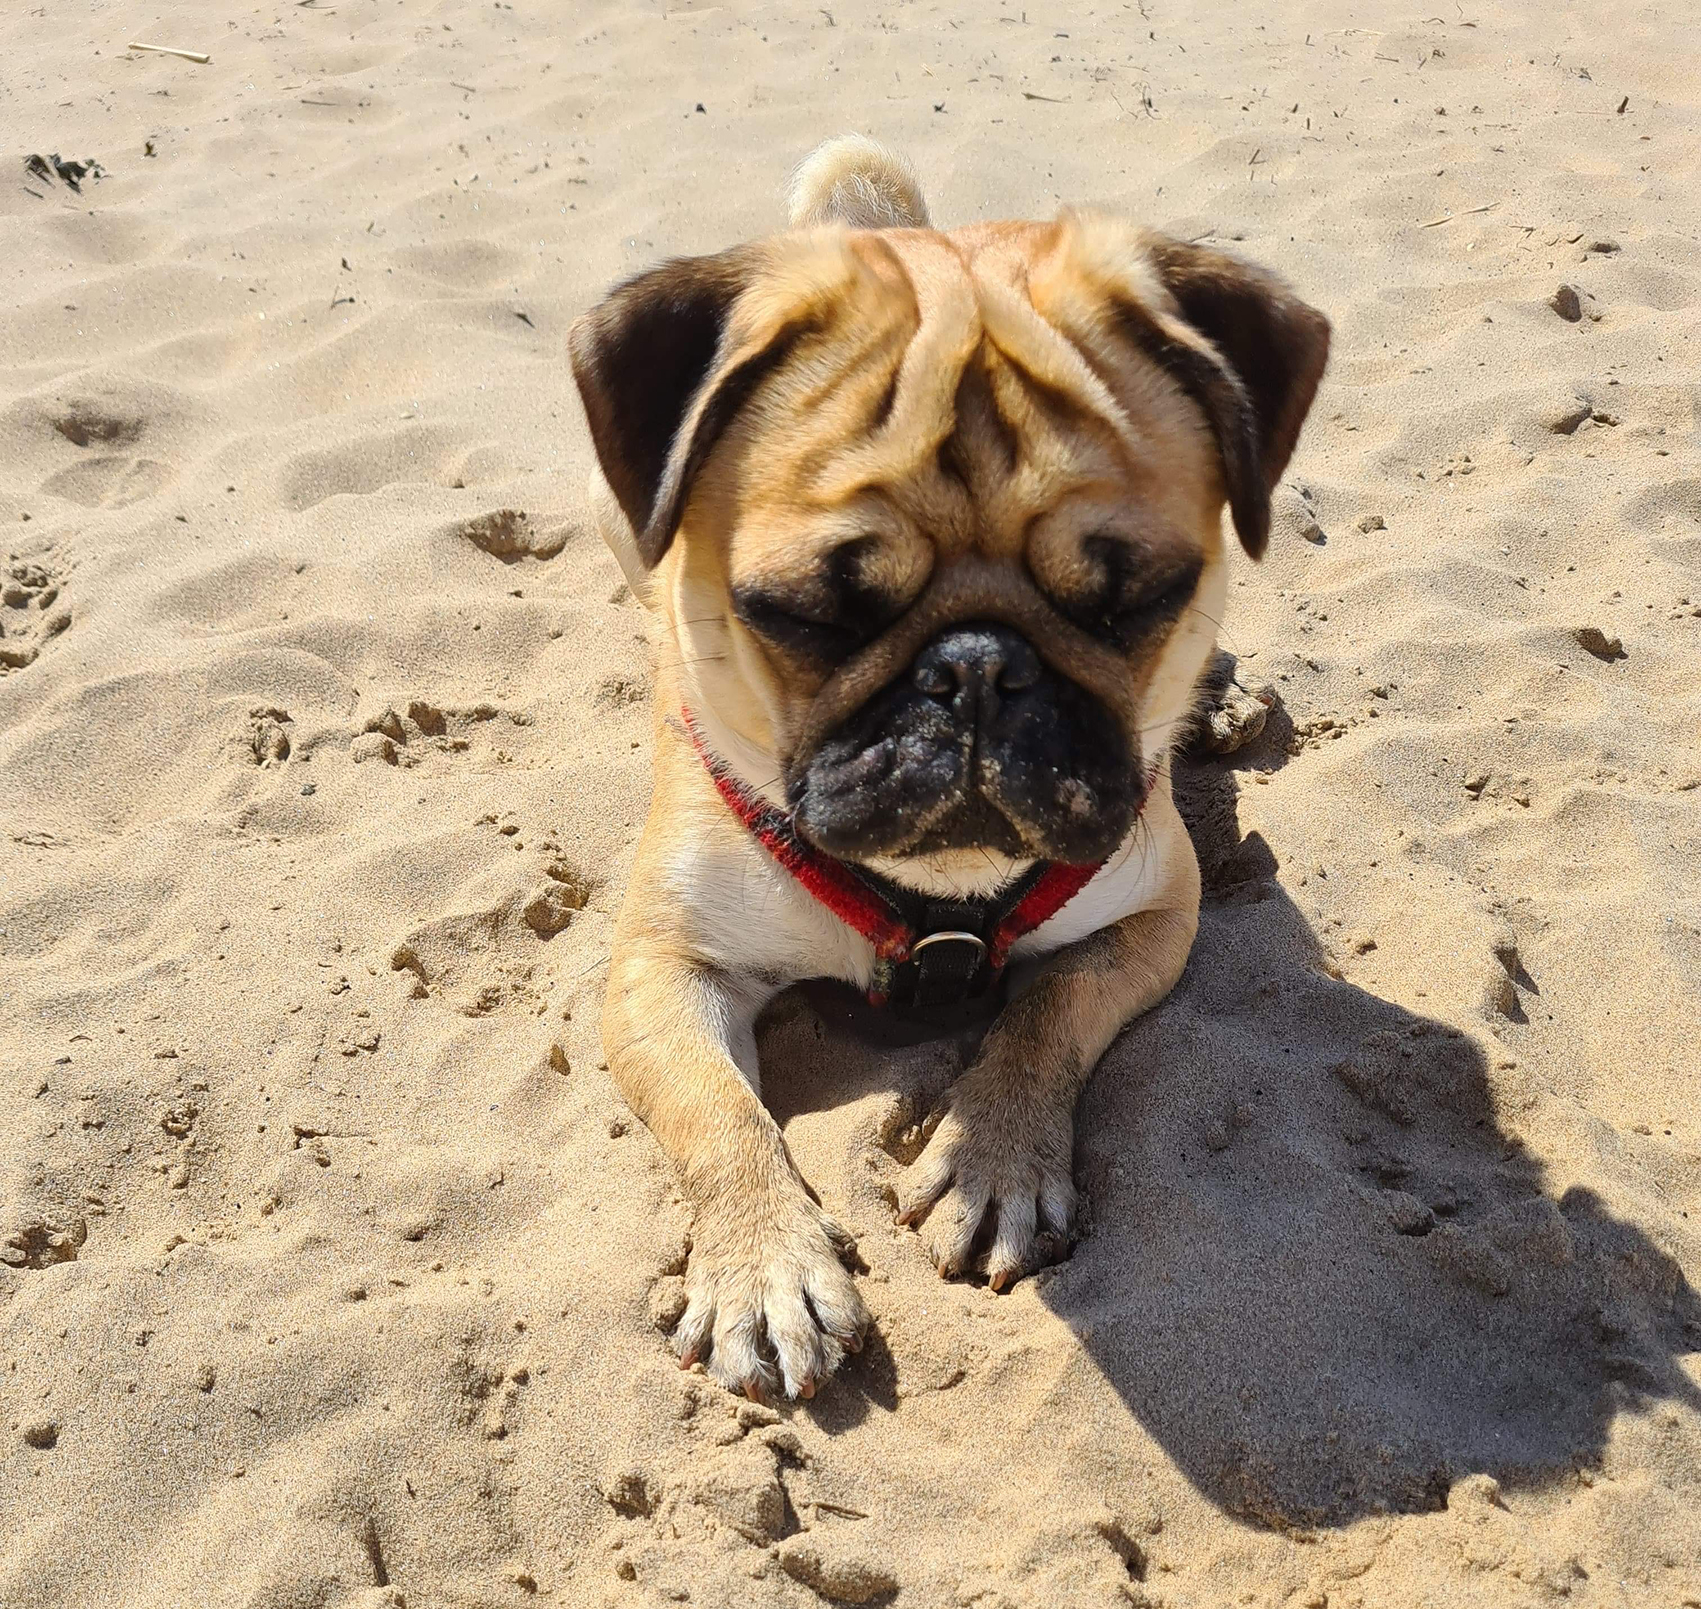 Foster care for Alfie - image Beau on https://pugprotectiontrust.org